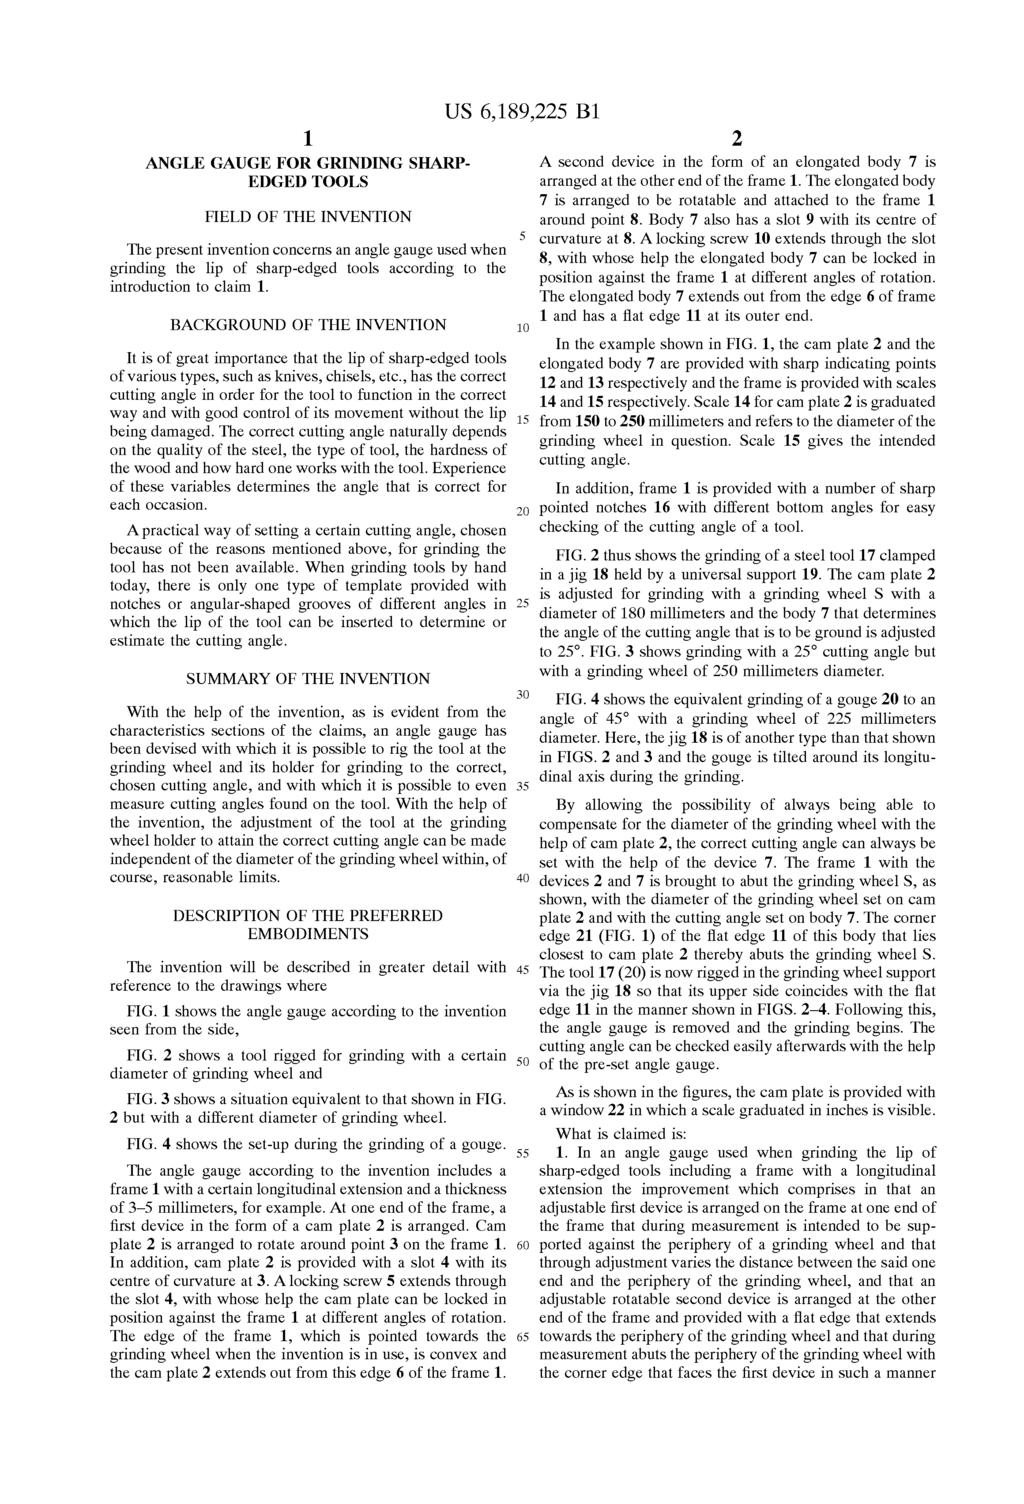 1 ANGLE GAUGE FOR GRINDING SHARP EDGED TOOLS FIELD OF THE INVENTION The present invention concerns an angle gauge used when grinding the lip of Sharp-edged tools according to the introduction to